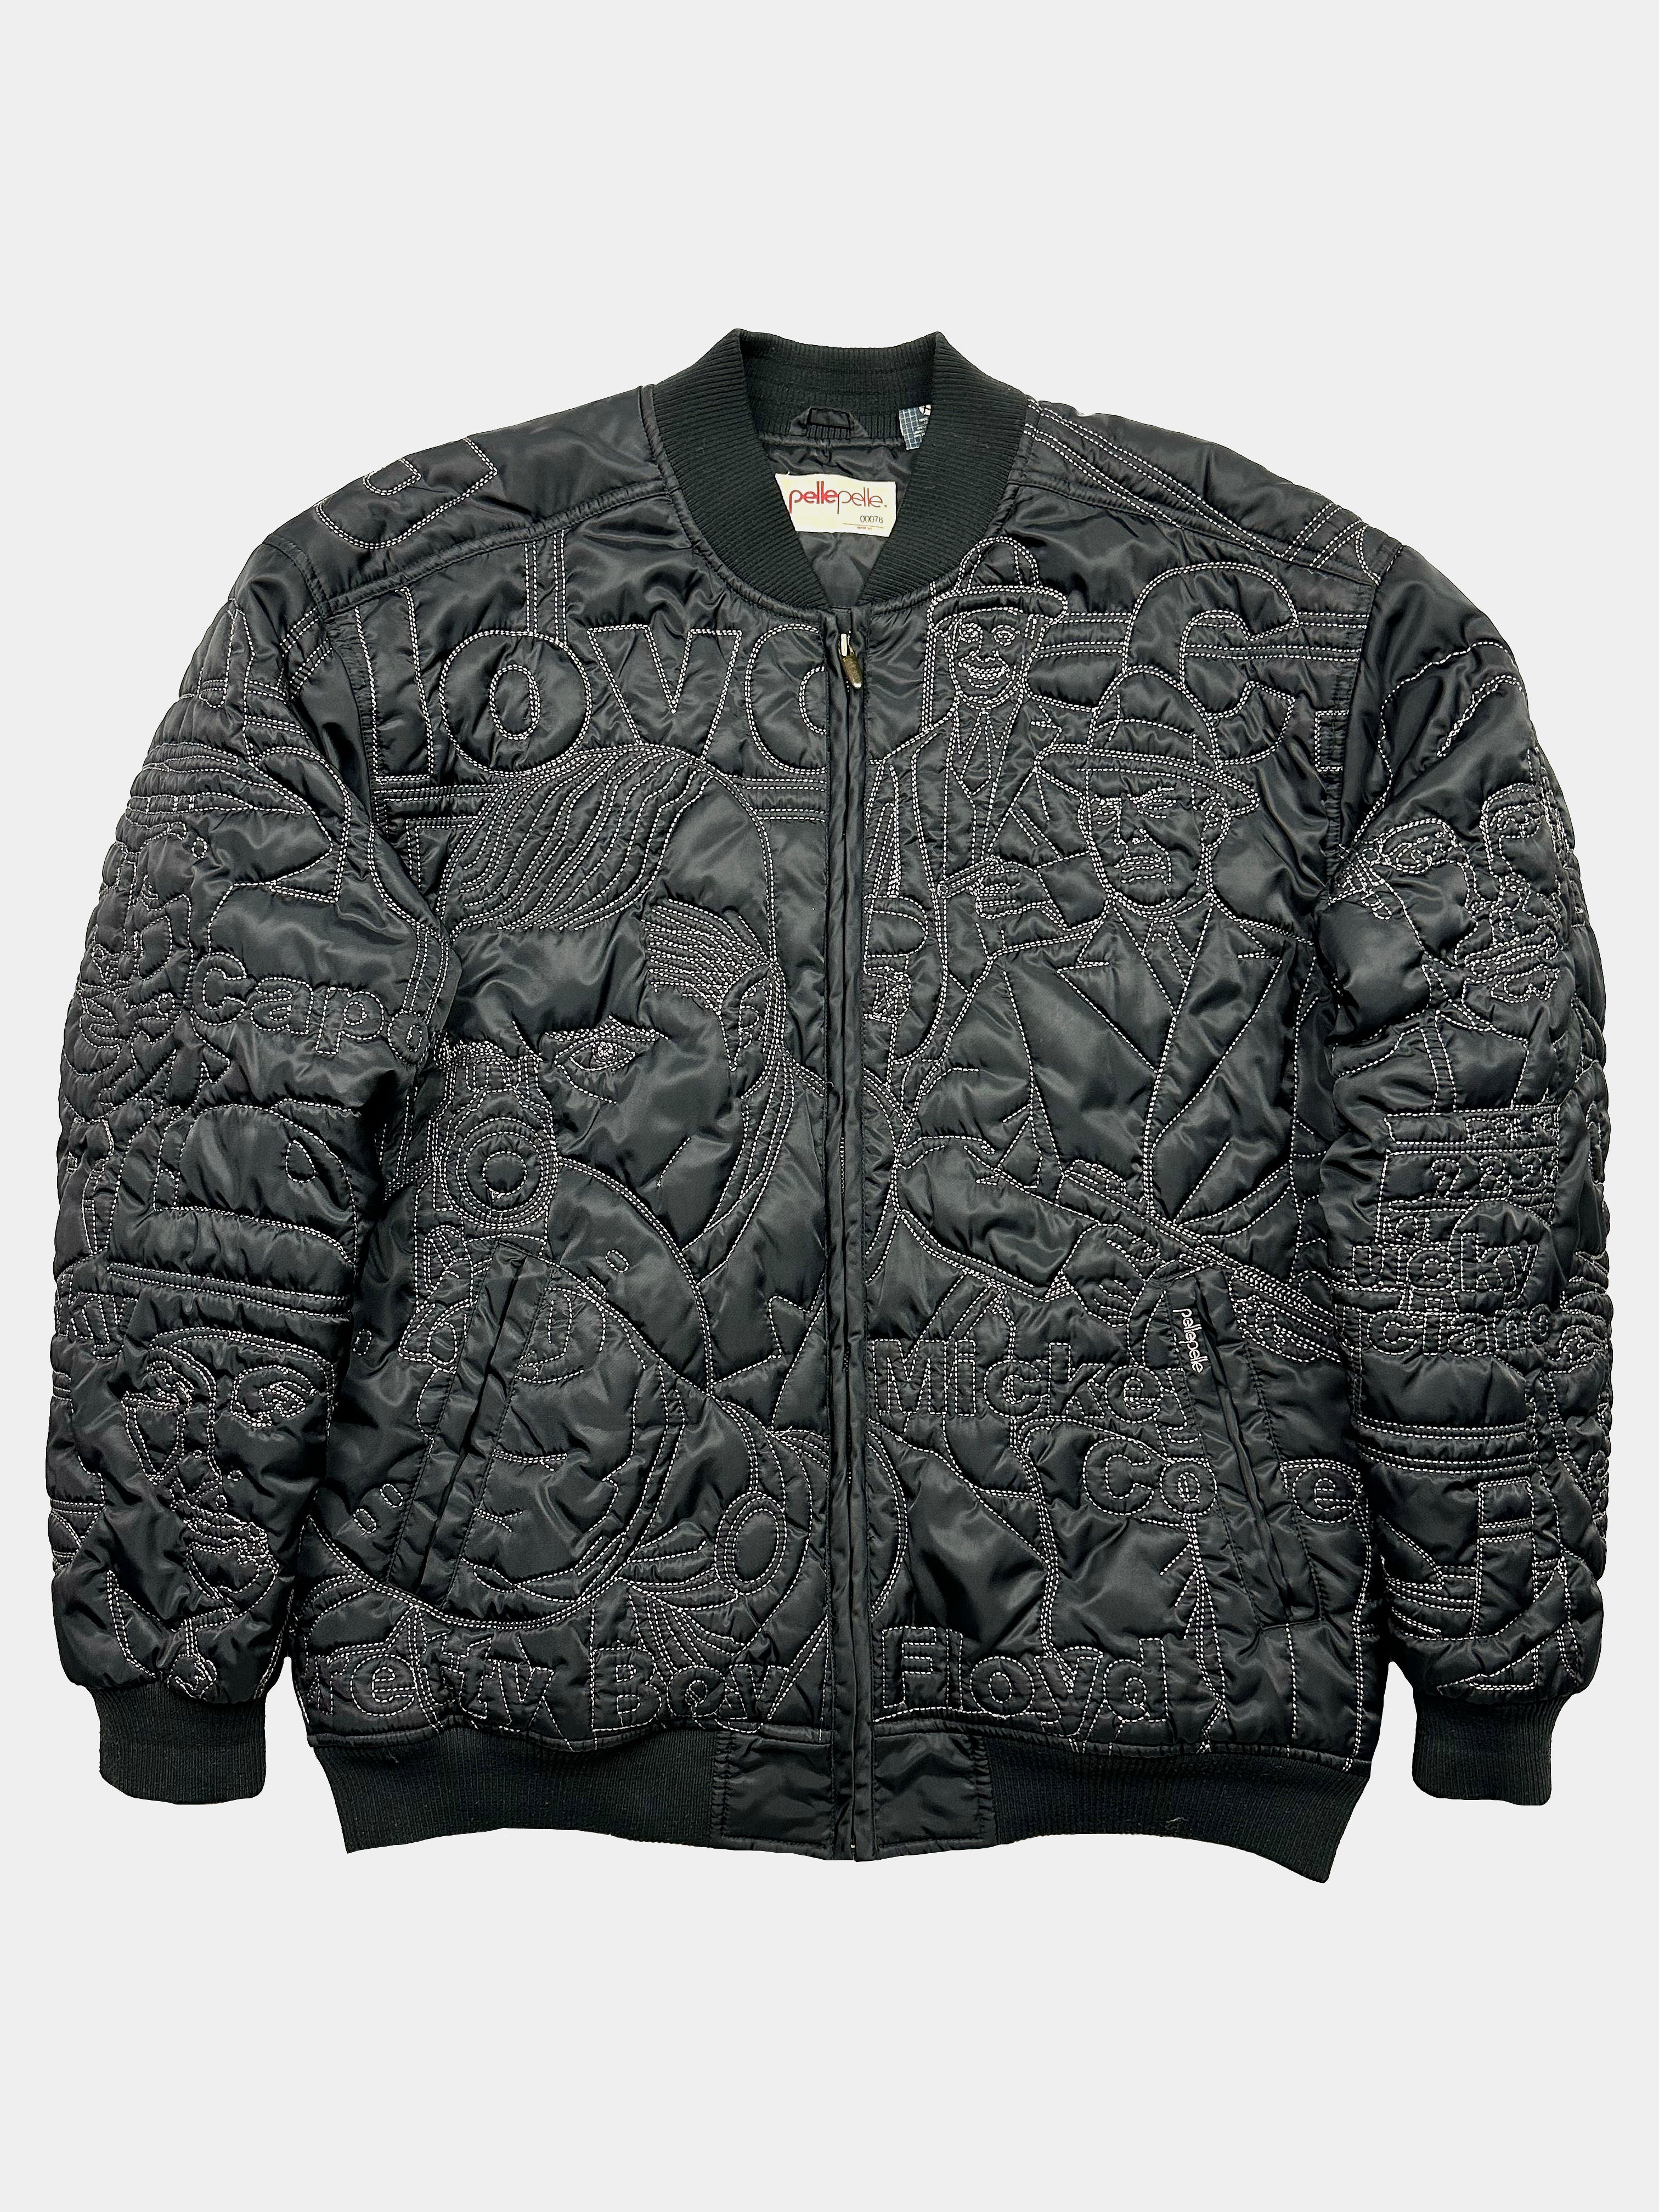 Pelle Pelle 'Gangsters' Embroidered Bomber 00's